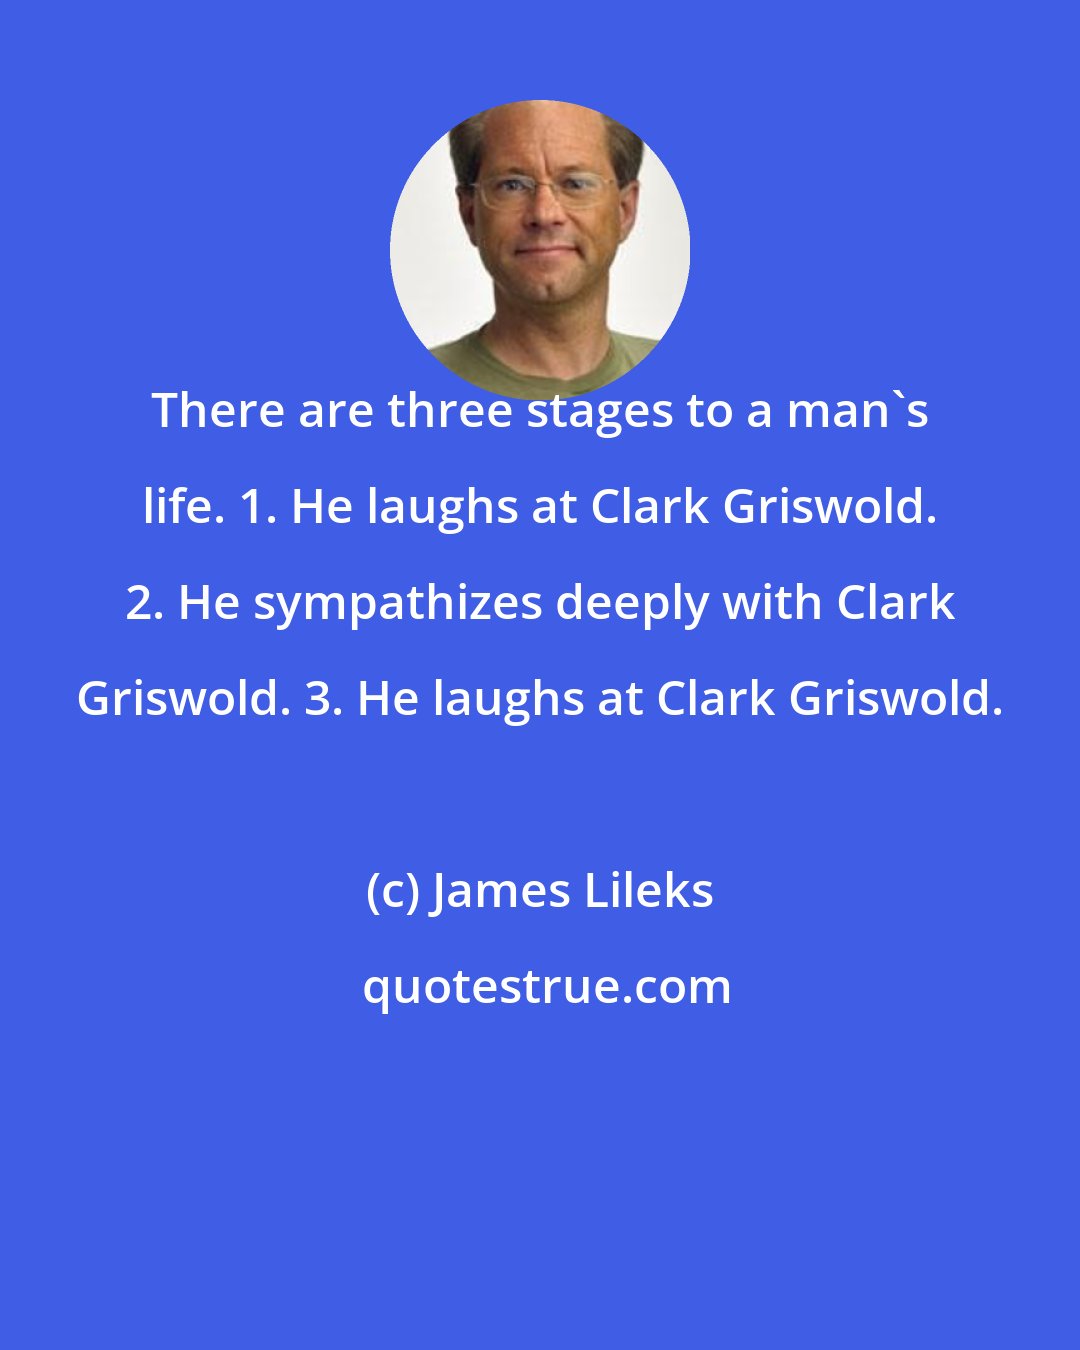 James Lileks: There are three stages to a man's life. 1. He laughs at Clark Griswold. 2. He sympathizes deeply with Clark Griswold. 3. He laughs at Clark Griswold.